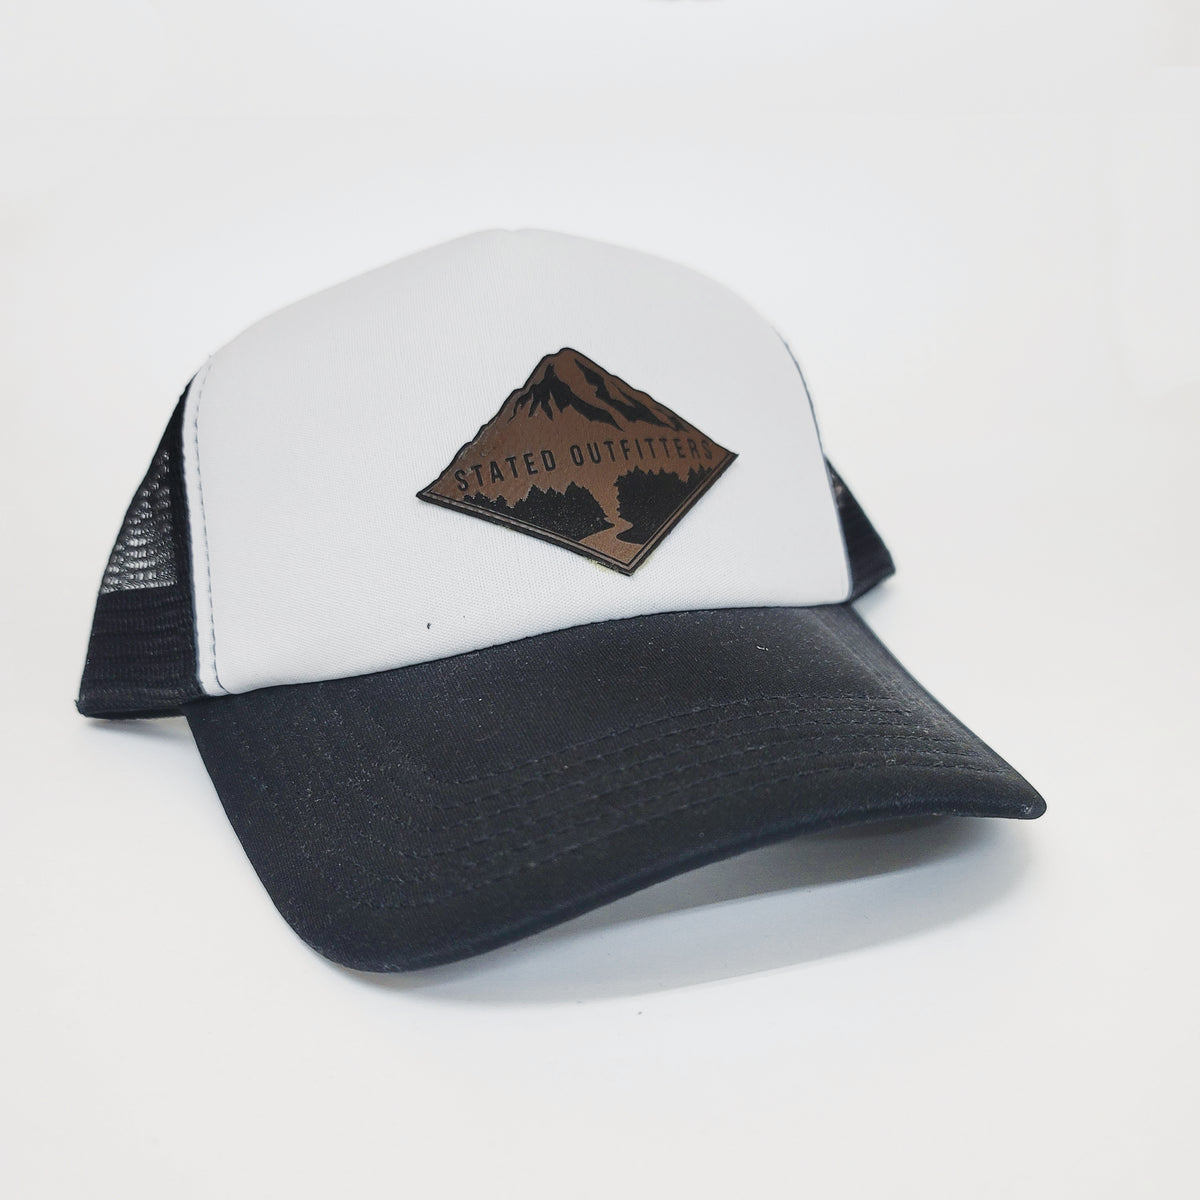 Stated Outfitters Patch Black/White Foam Hat